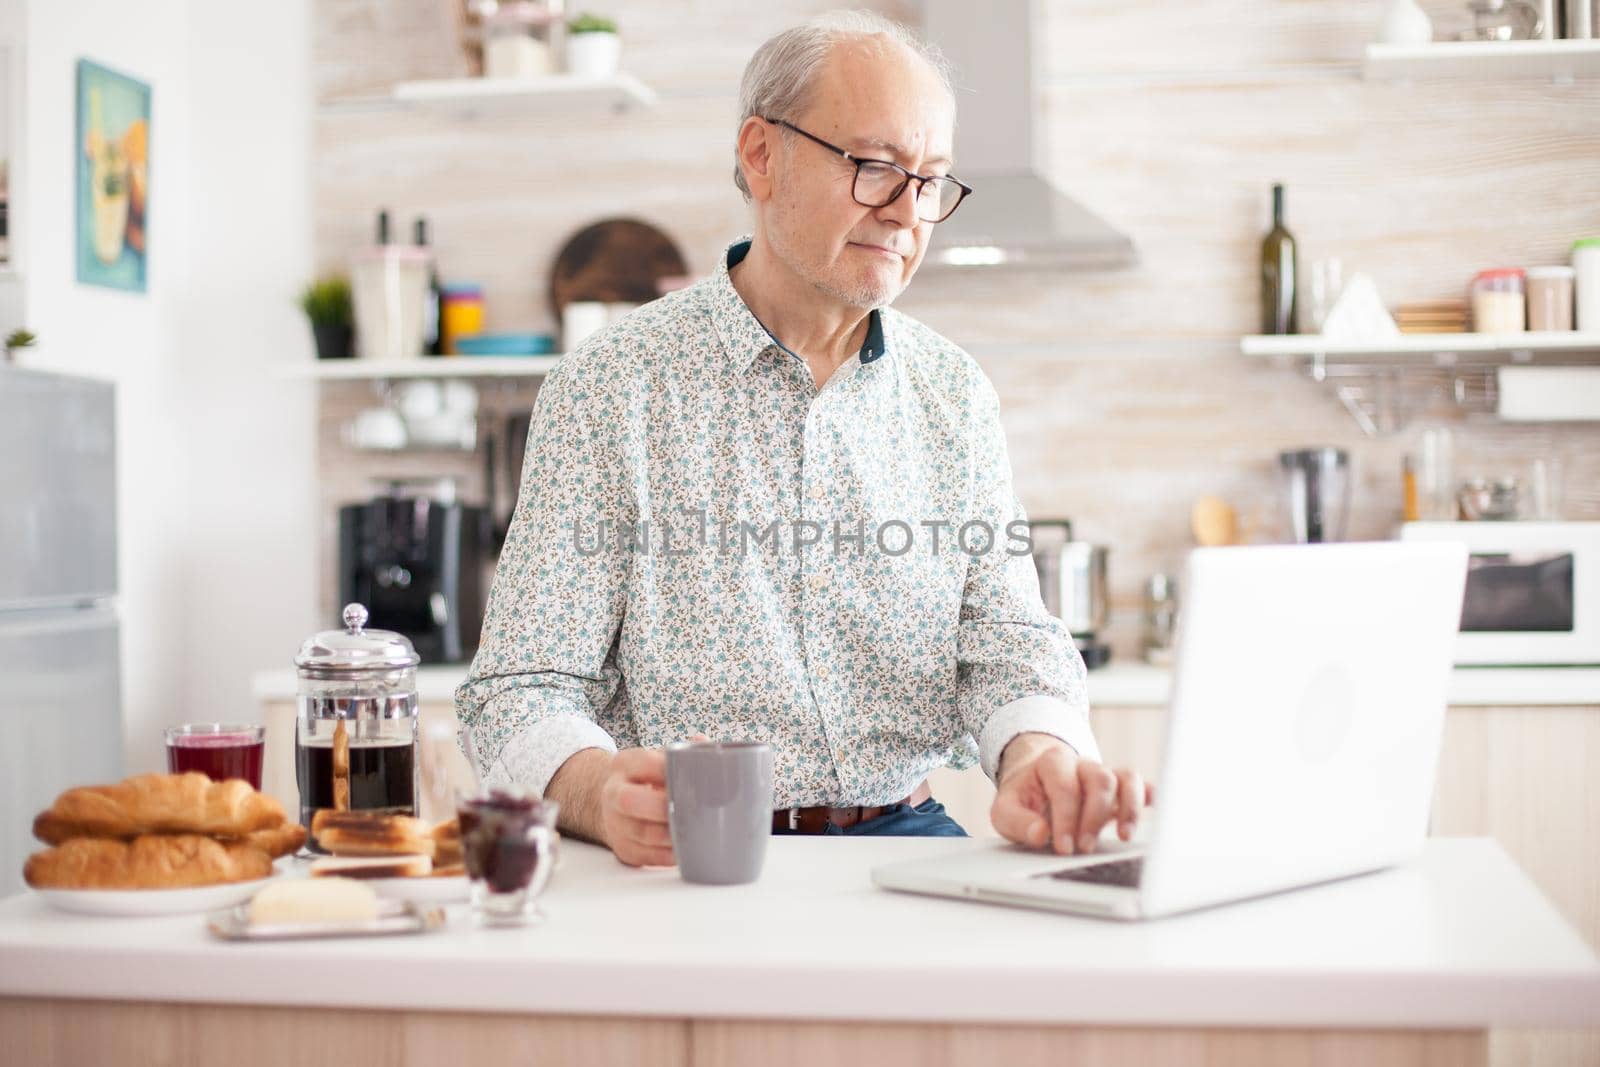 Senior man smiling and using laptop in the kitchen. Daily life of senior man in kitchen during breakfast using laptop holding a cup of coffee. Elderly retired person working from home, telecommuting using remote internet job online communication on modern technology notebook